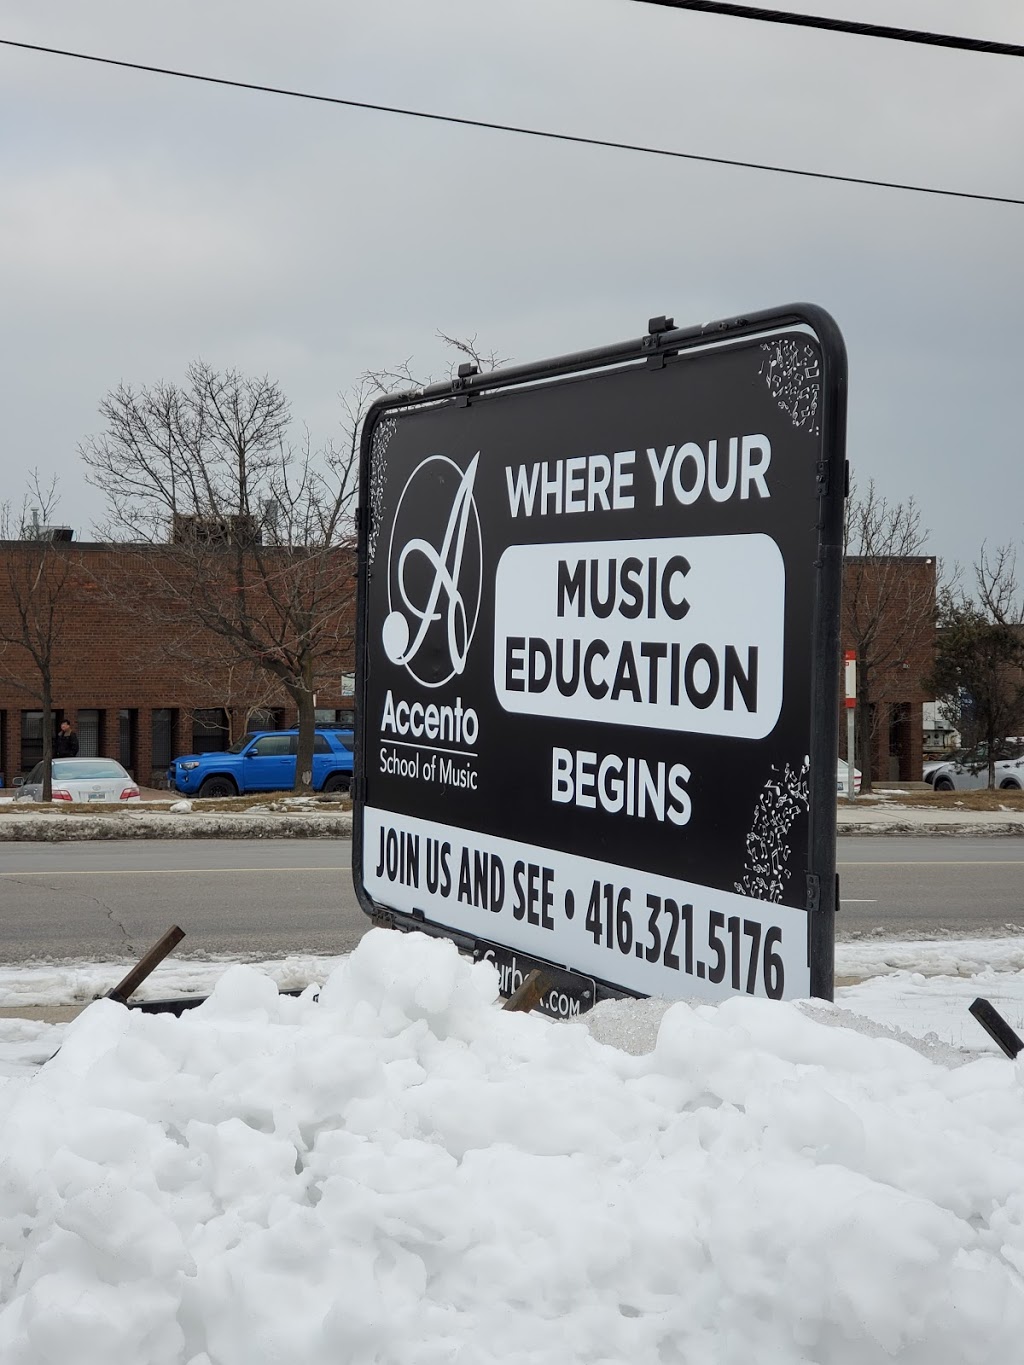 Accento School of Music | 1457 McCowan Rd Suite 205 A, Scarborough, ON M1S 5K7, Canada | Phone: (416) 321-5176